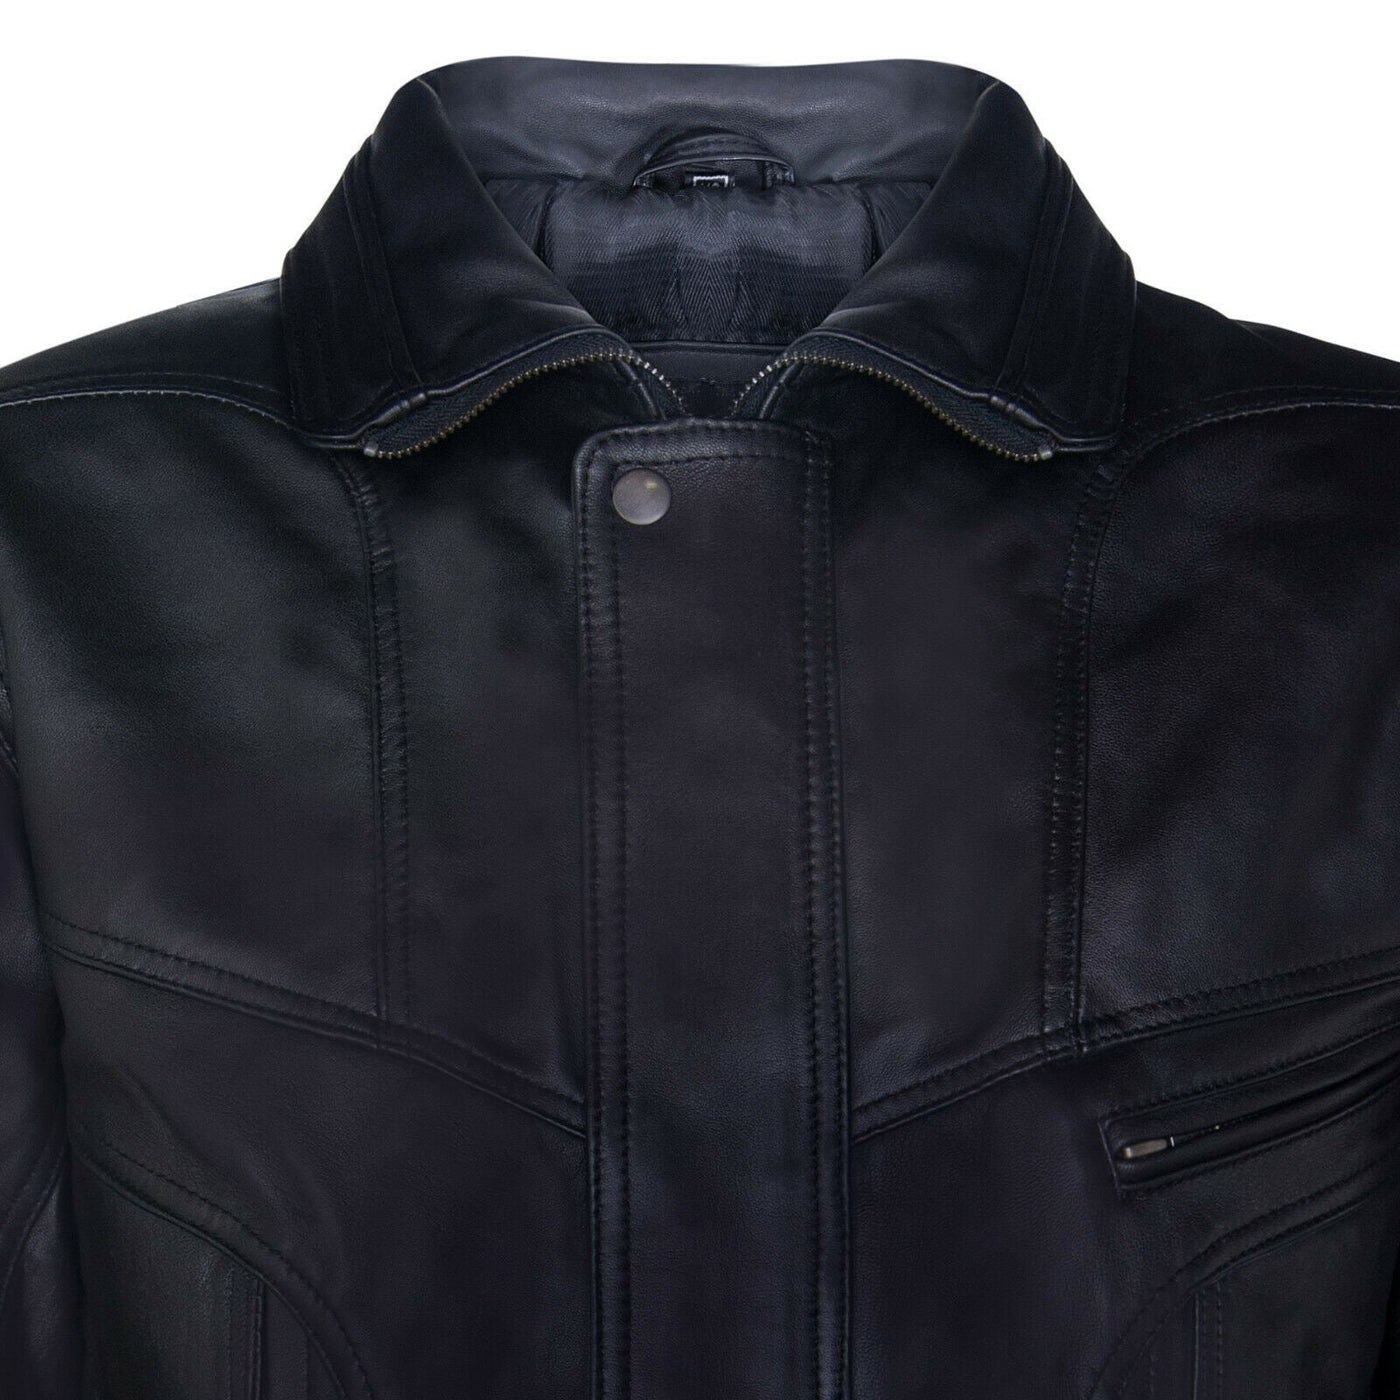 Mens Leather Bluson Tailored Bomber Jacket